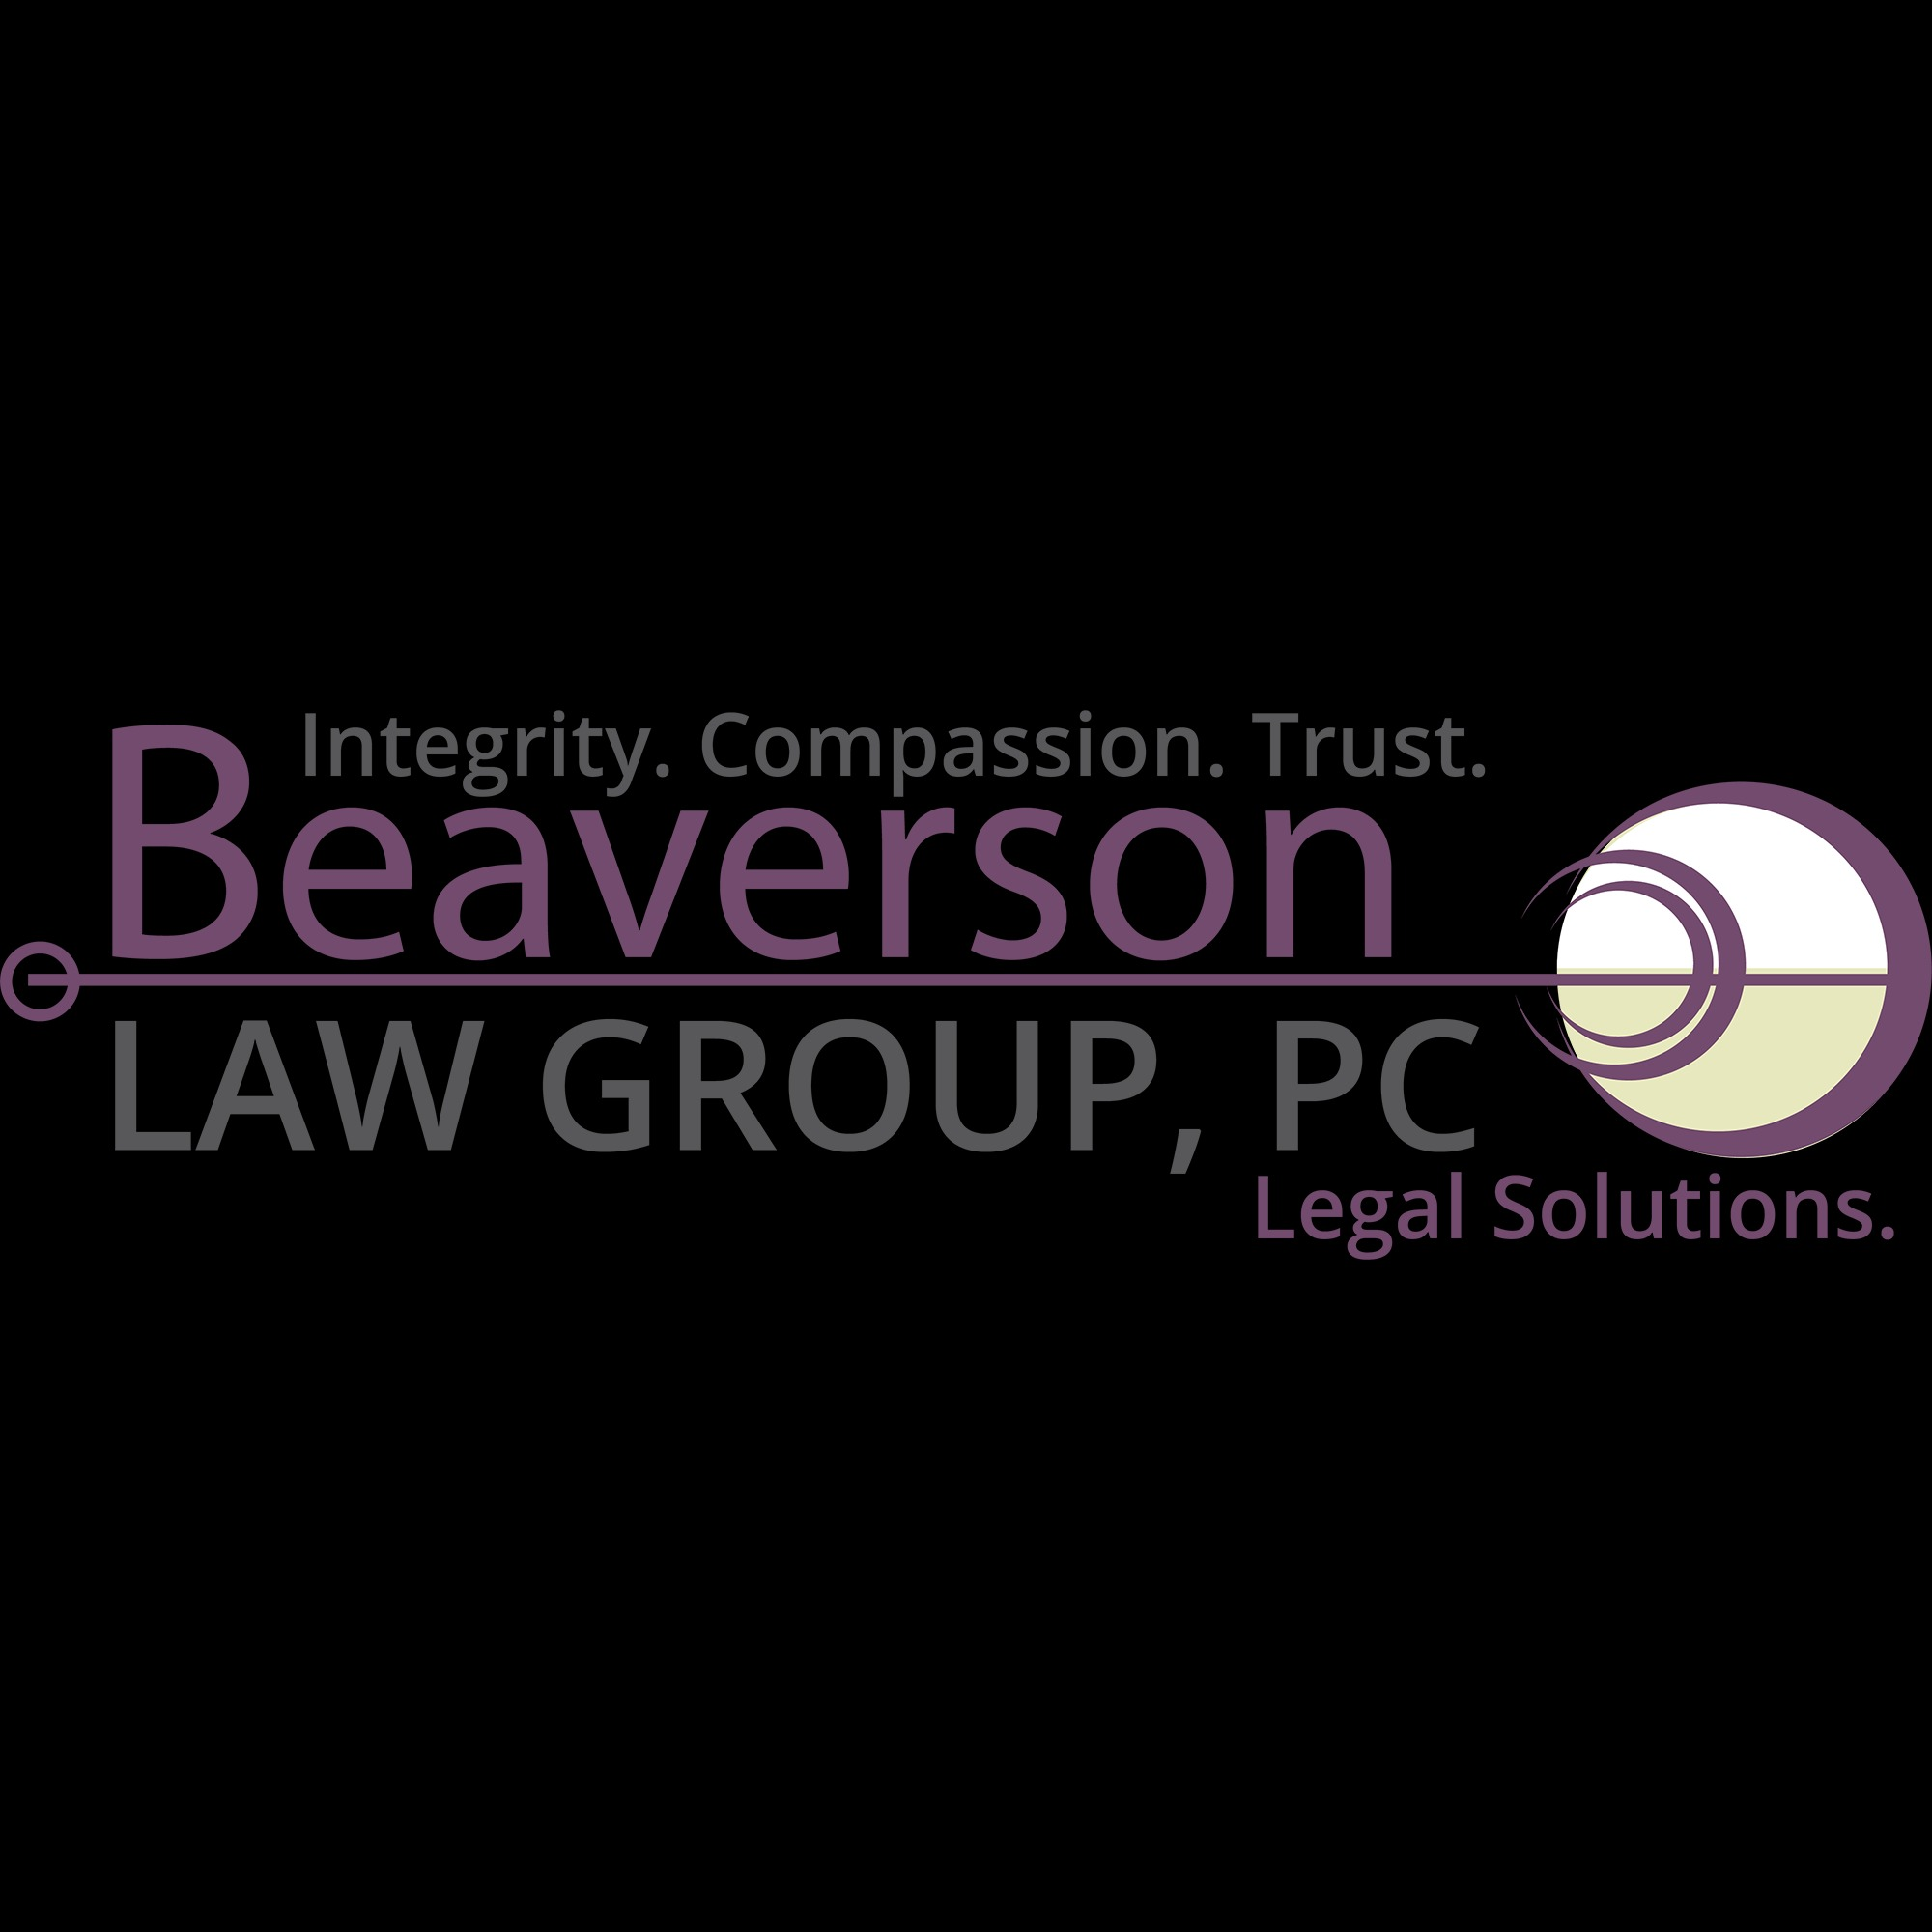 Beaverson Law Group, PC - Elkhart, IN 46516 - (574)343-1385 | ShowMeLocal.com